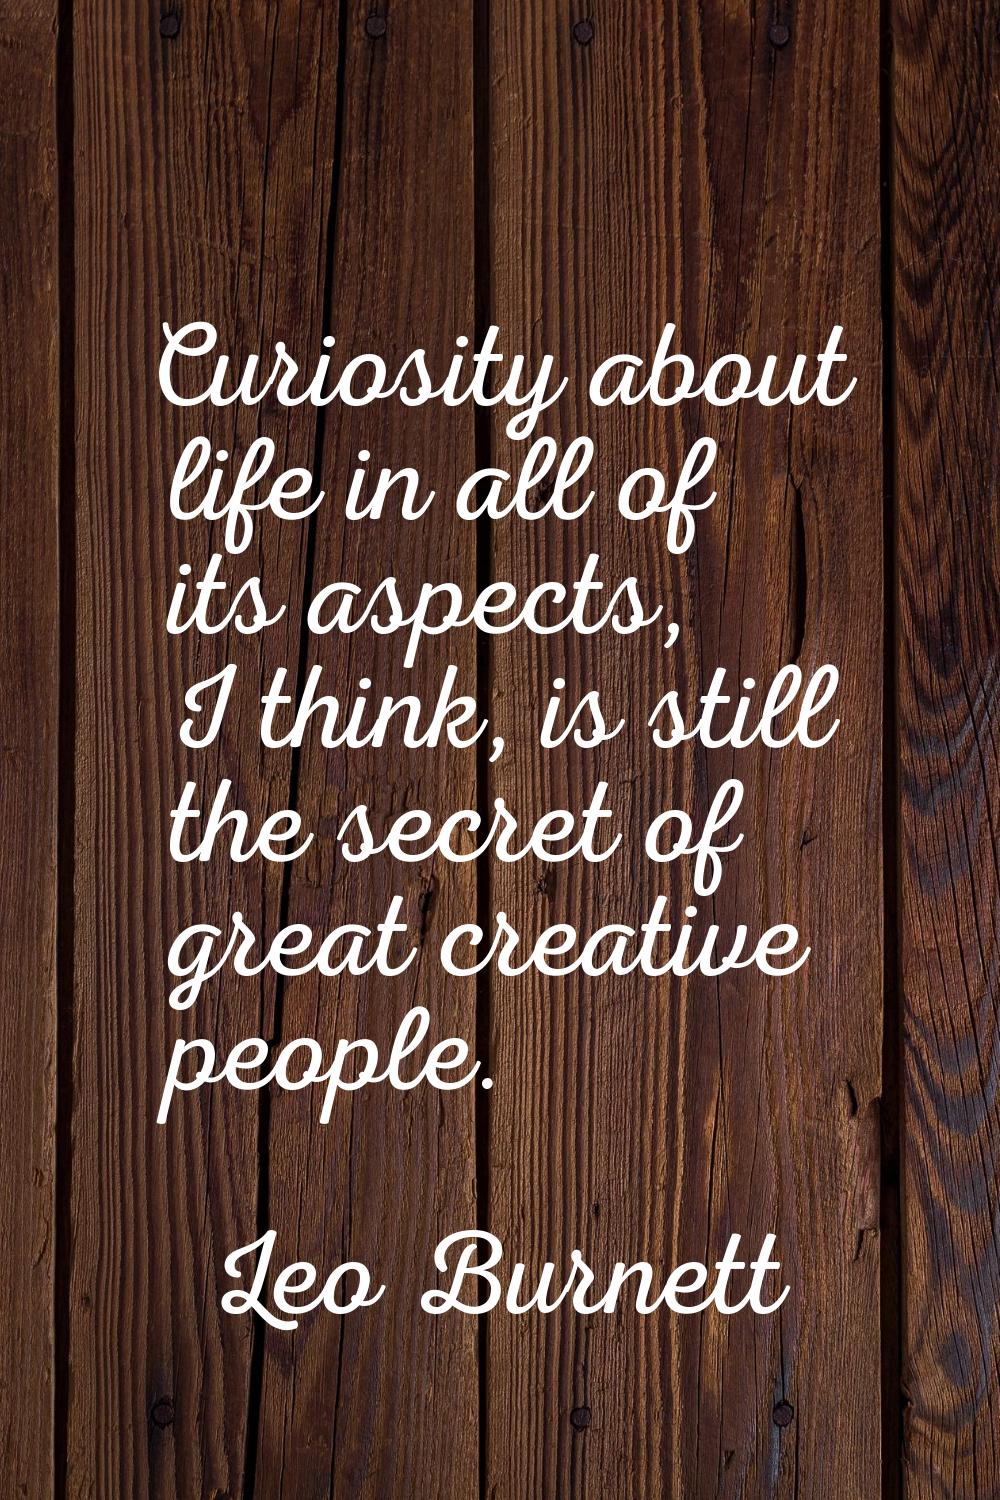 Curiosity about life in all of its aspects, I think, is still the secret of great creative people.